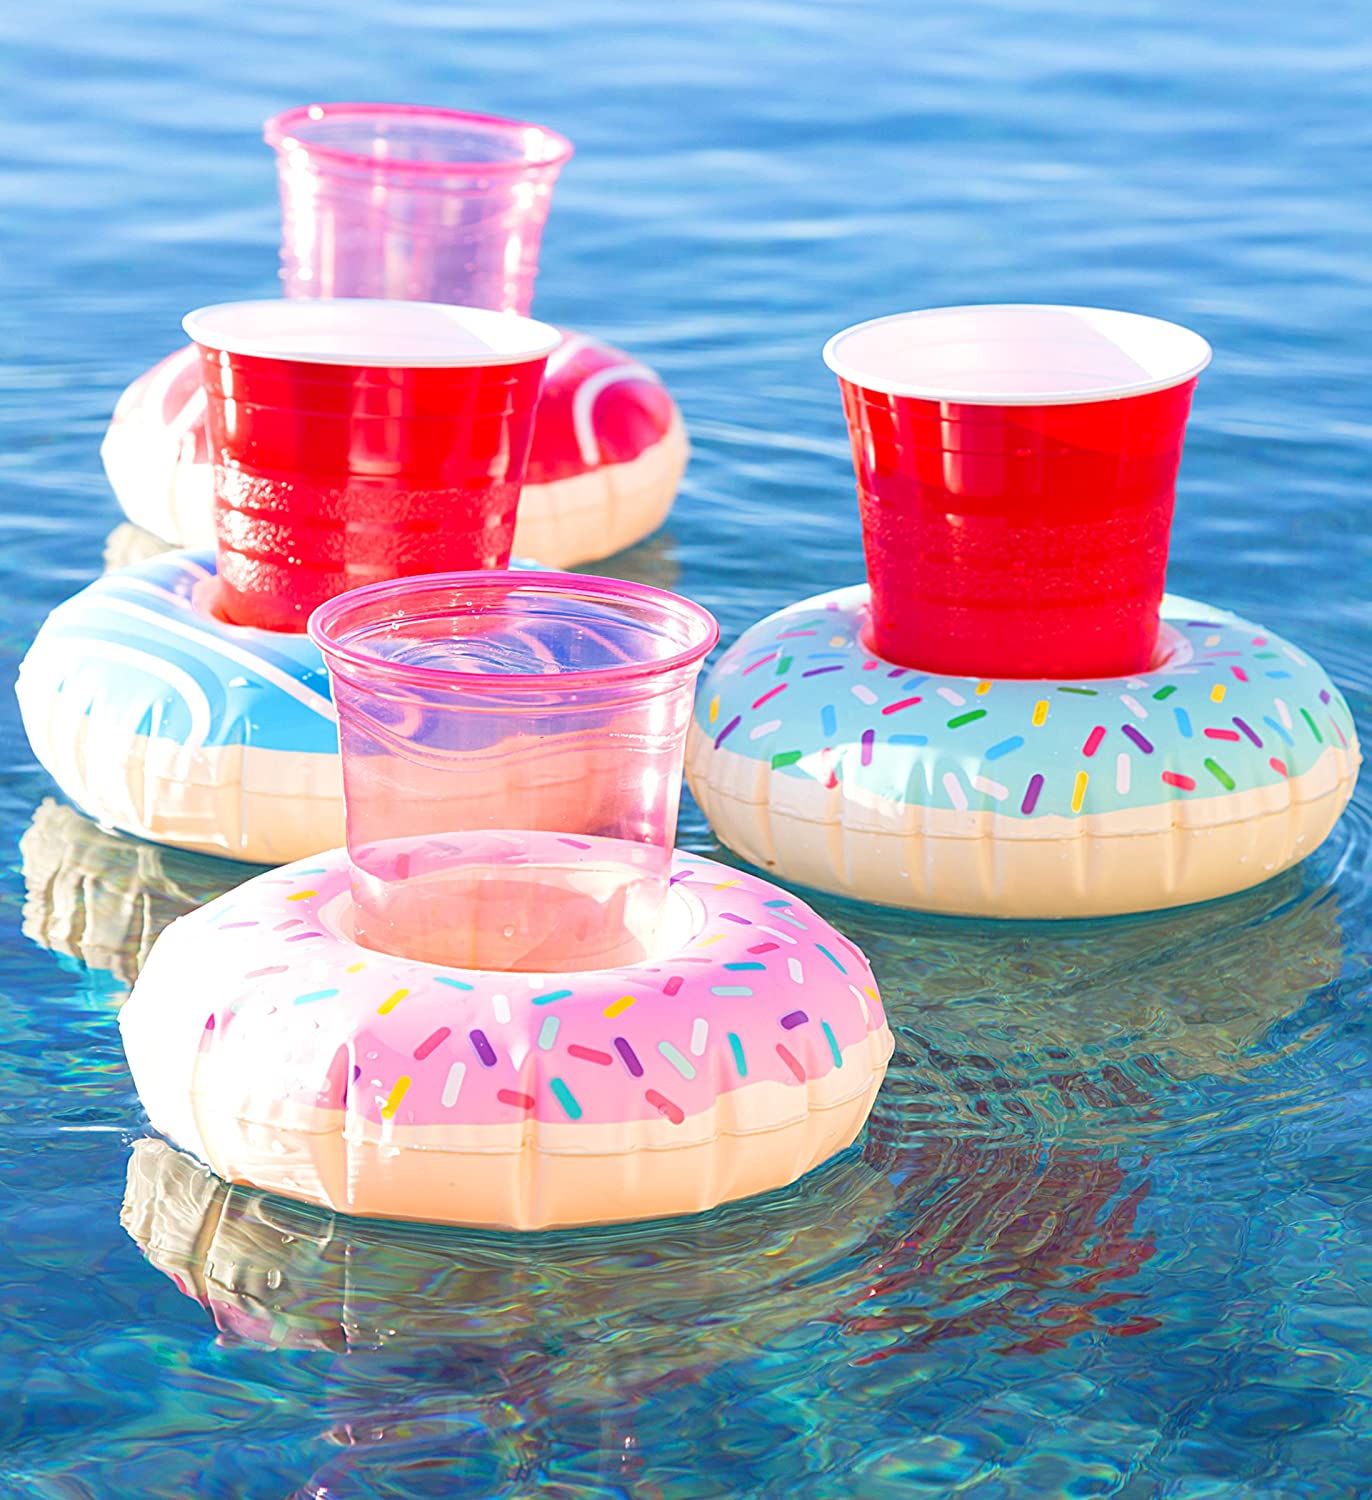 https://rare.us/wp-content/uploads/2021/03/CoTa-Global-Pool-Party-%E2%80%93-Funny-Delectable-Frosted-Donut-Inspired-Inflatable-Ring-Drink-Holder-Set-of-4-for-The-Beach-Pool-Party-Heavy-Duty-UV...-.jpg